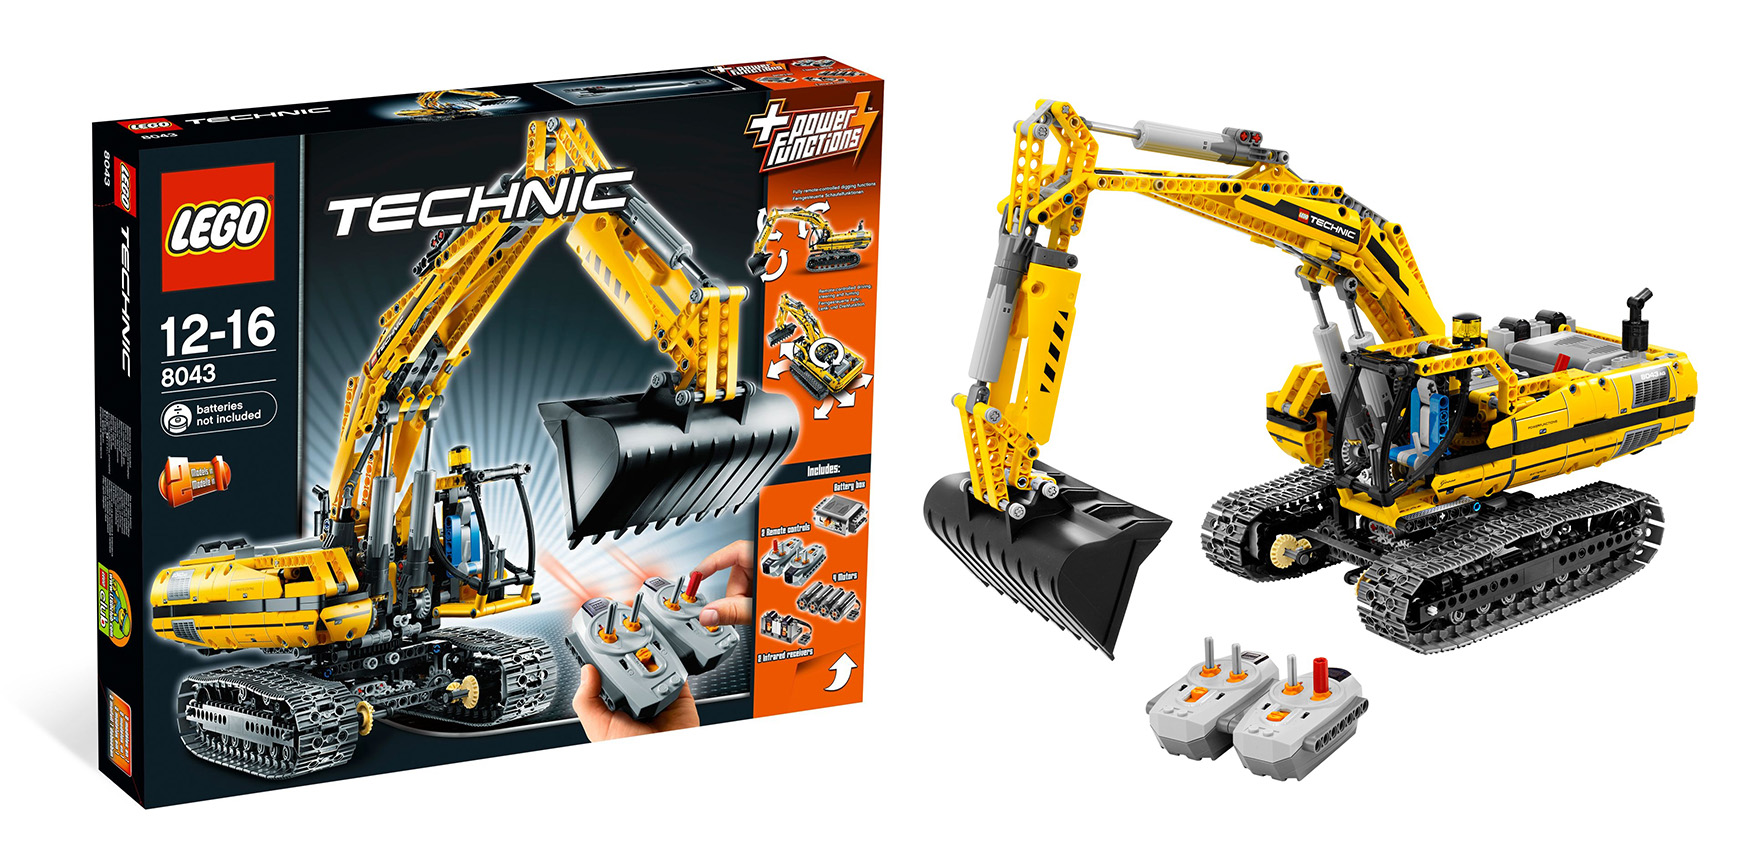 The best Lego Bionicle sets of all time